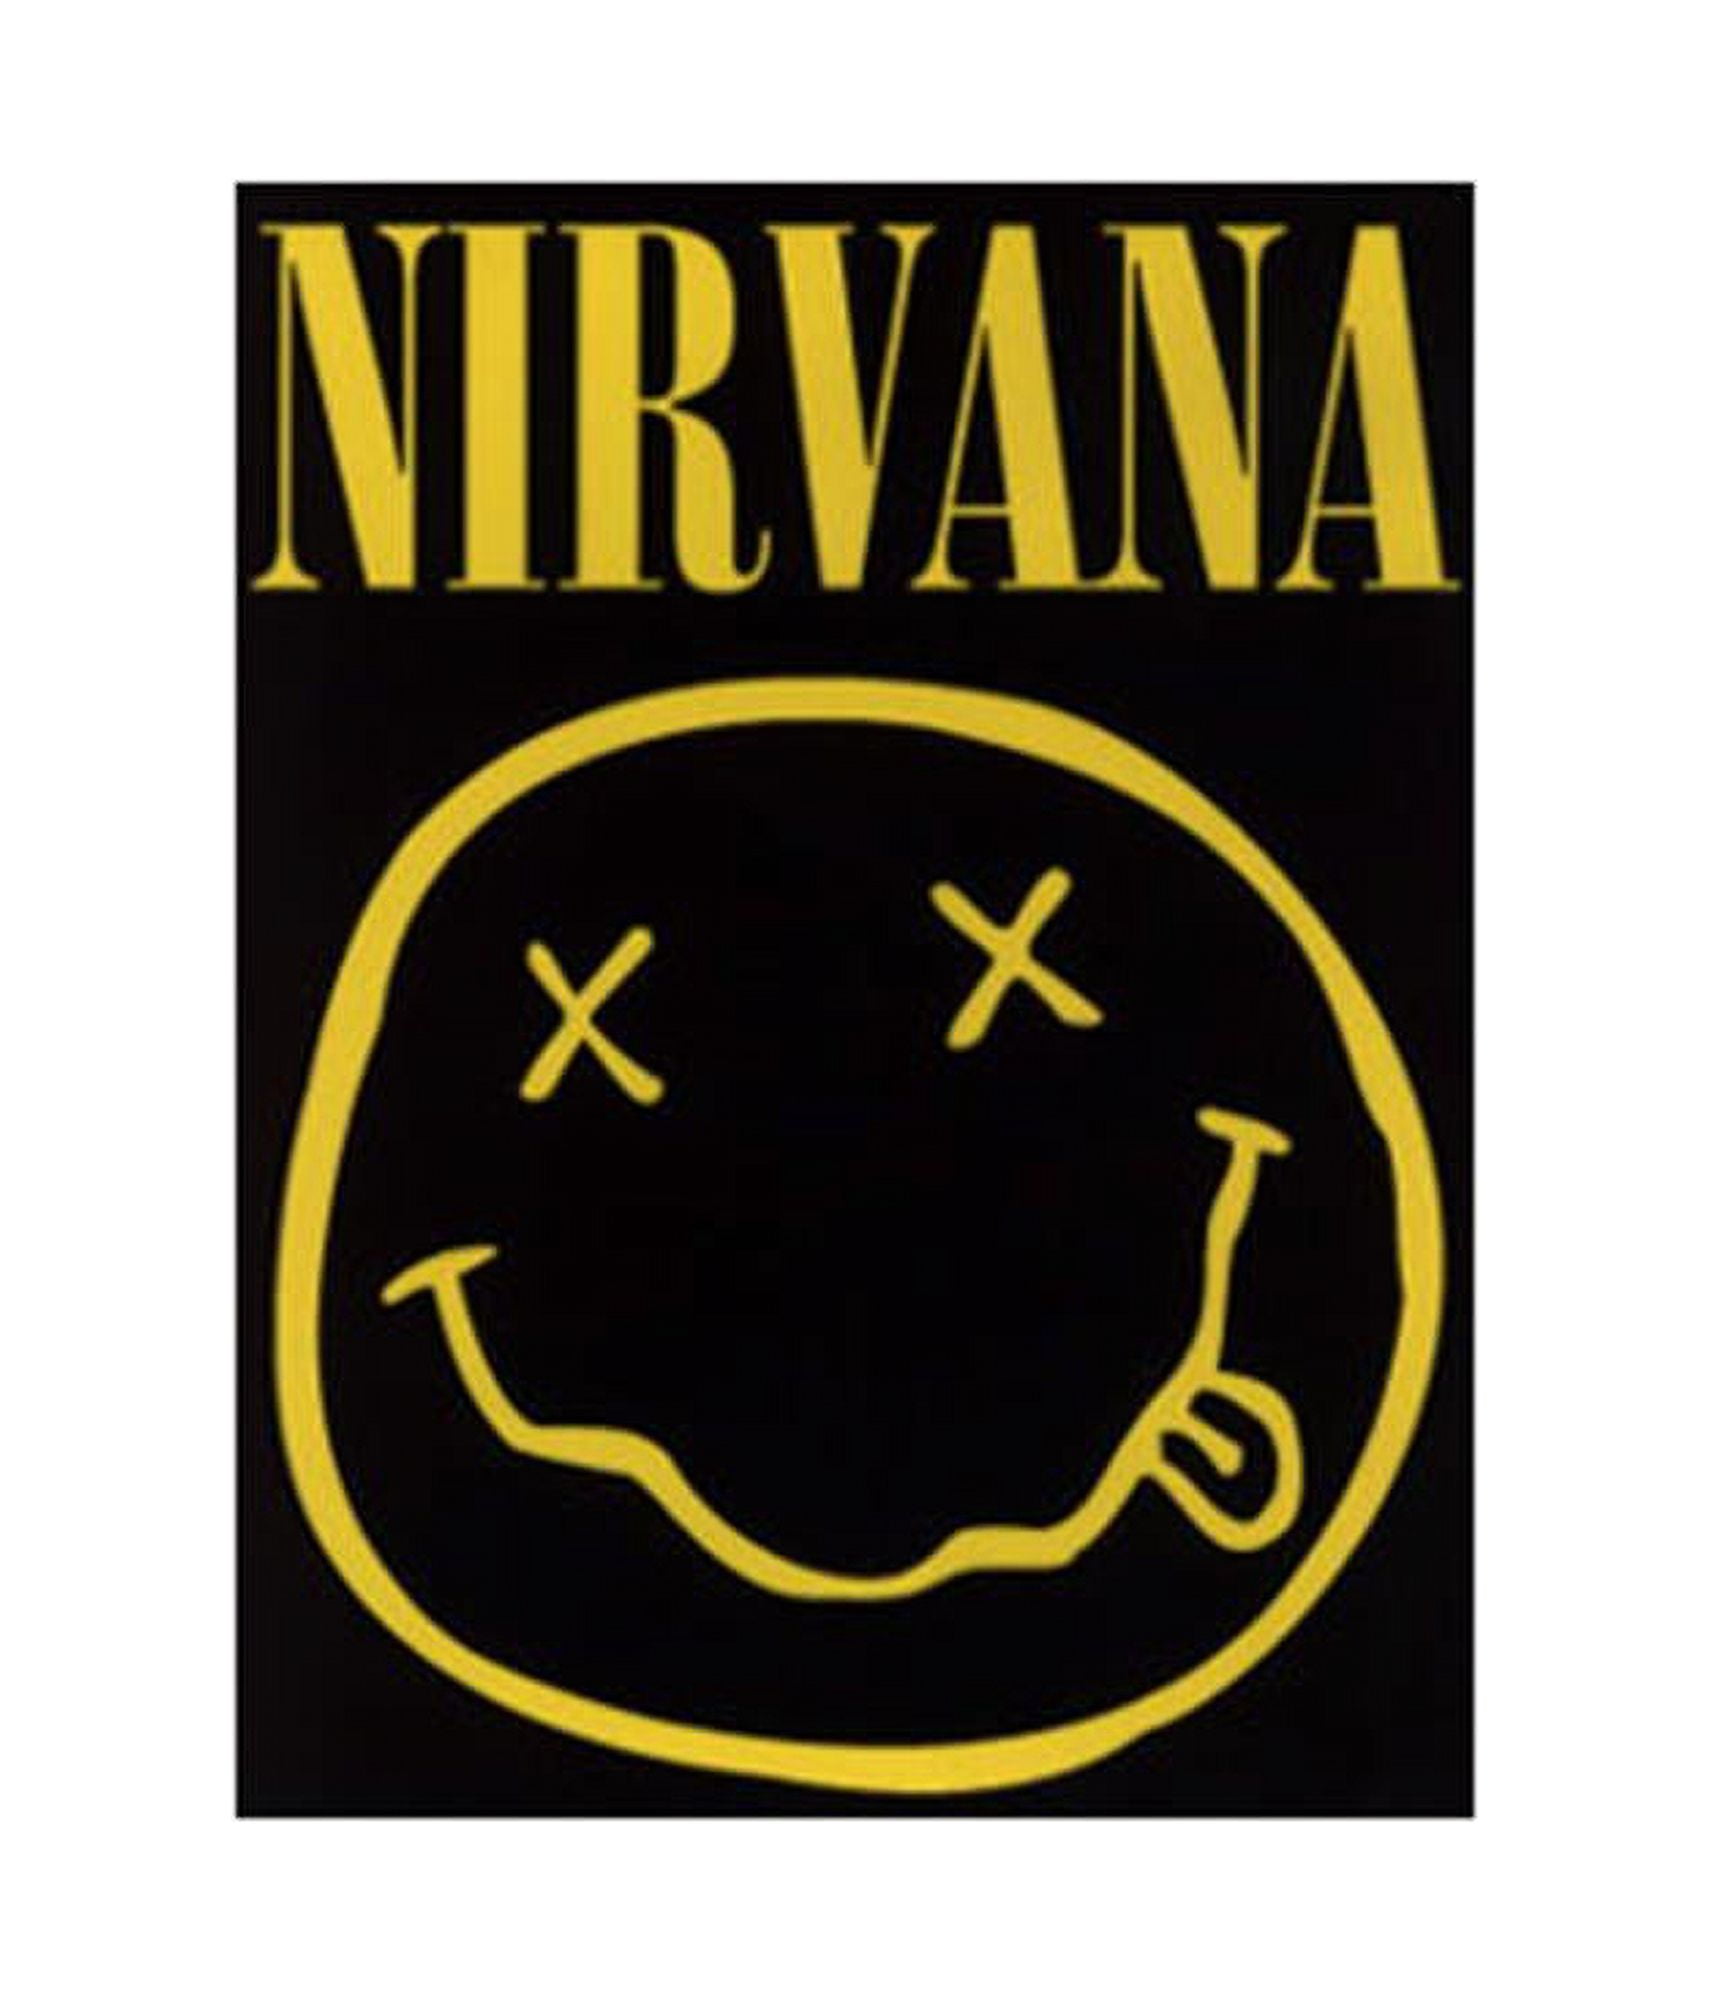 Nirvana Smiley Face Rock Band Music Bumper Sticker / Decal by Superheroes  Brand